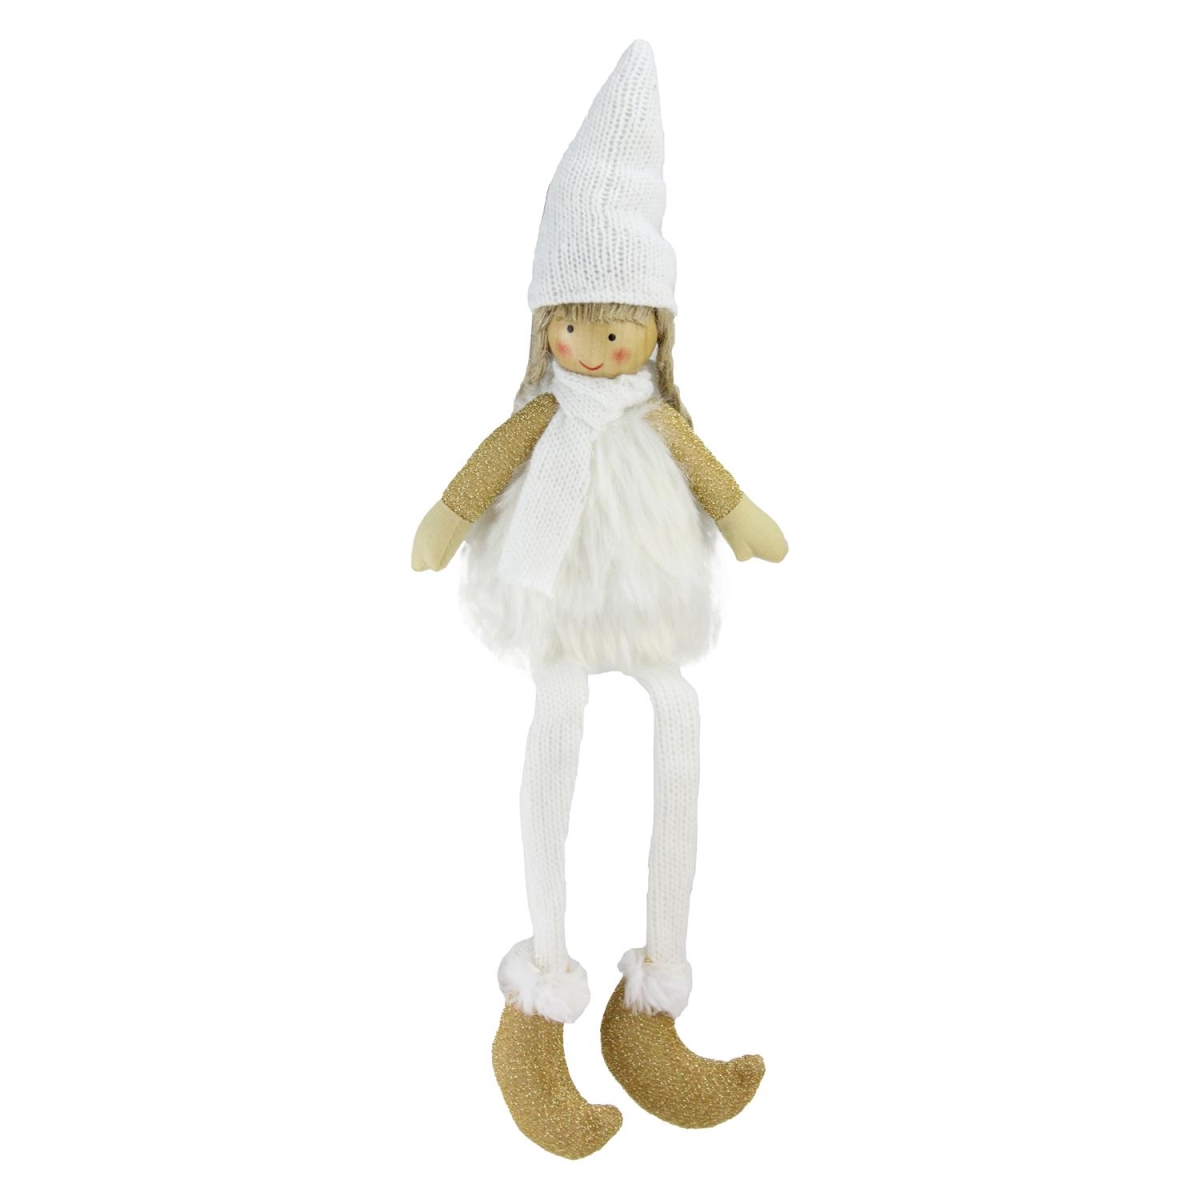 Picture of Northlight 32620398 Girl with Scarf & Dangling Legs Tabletop Decoration